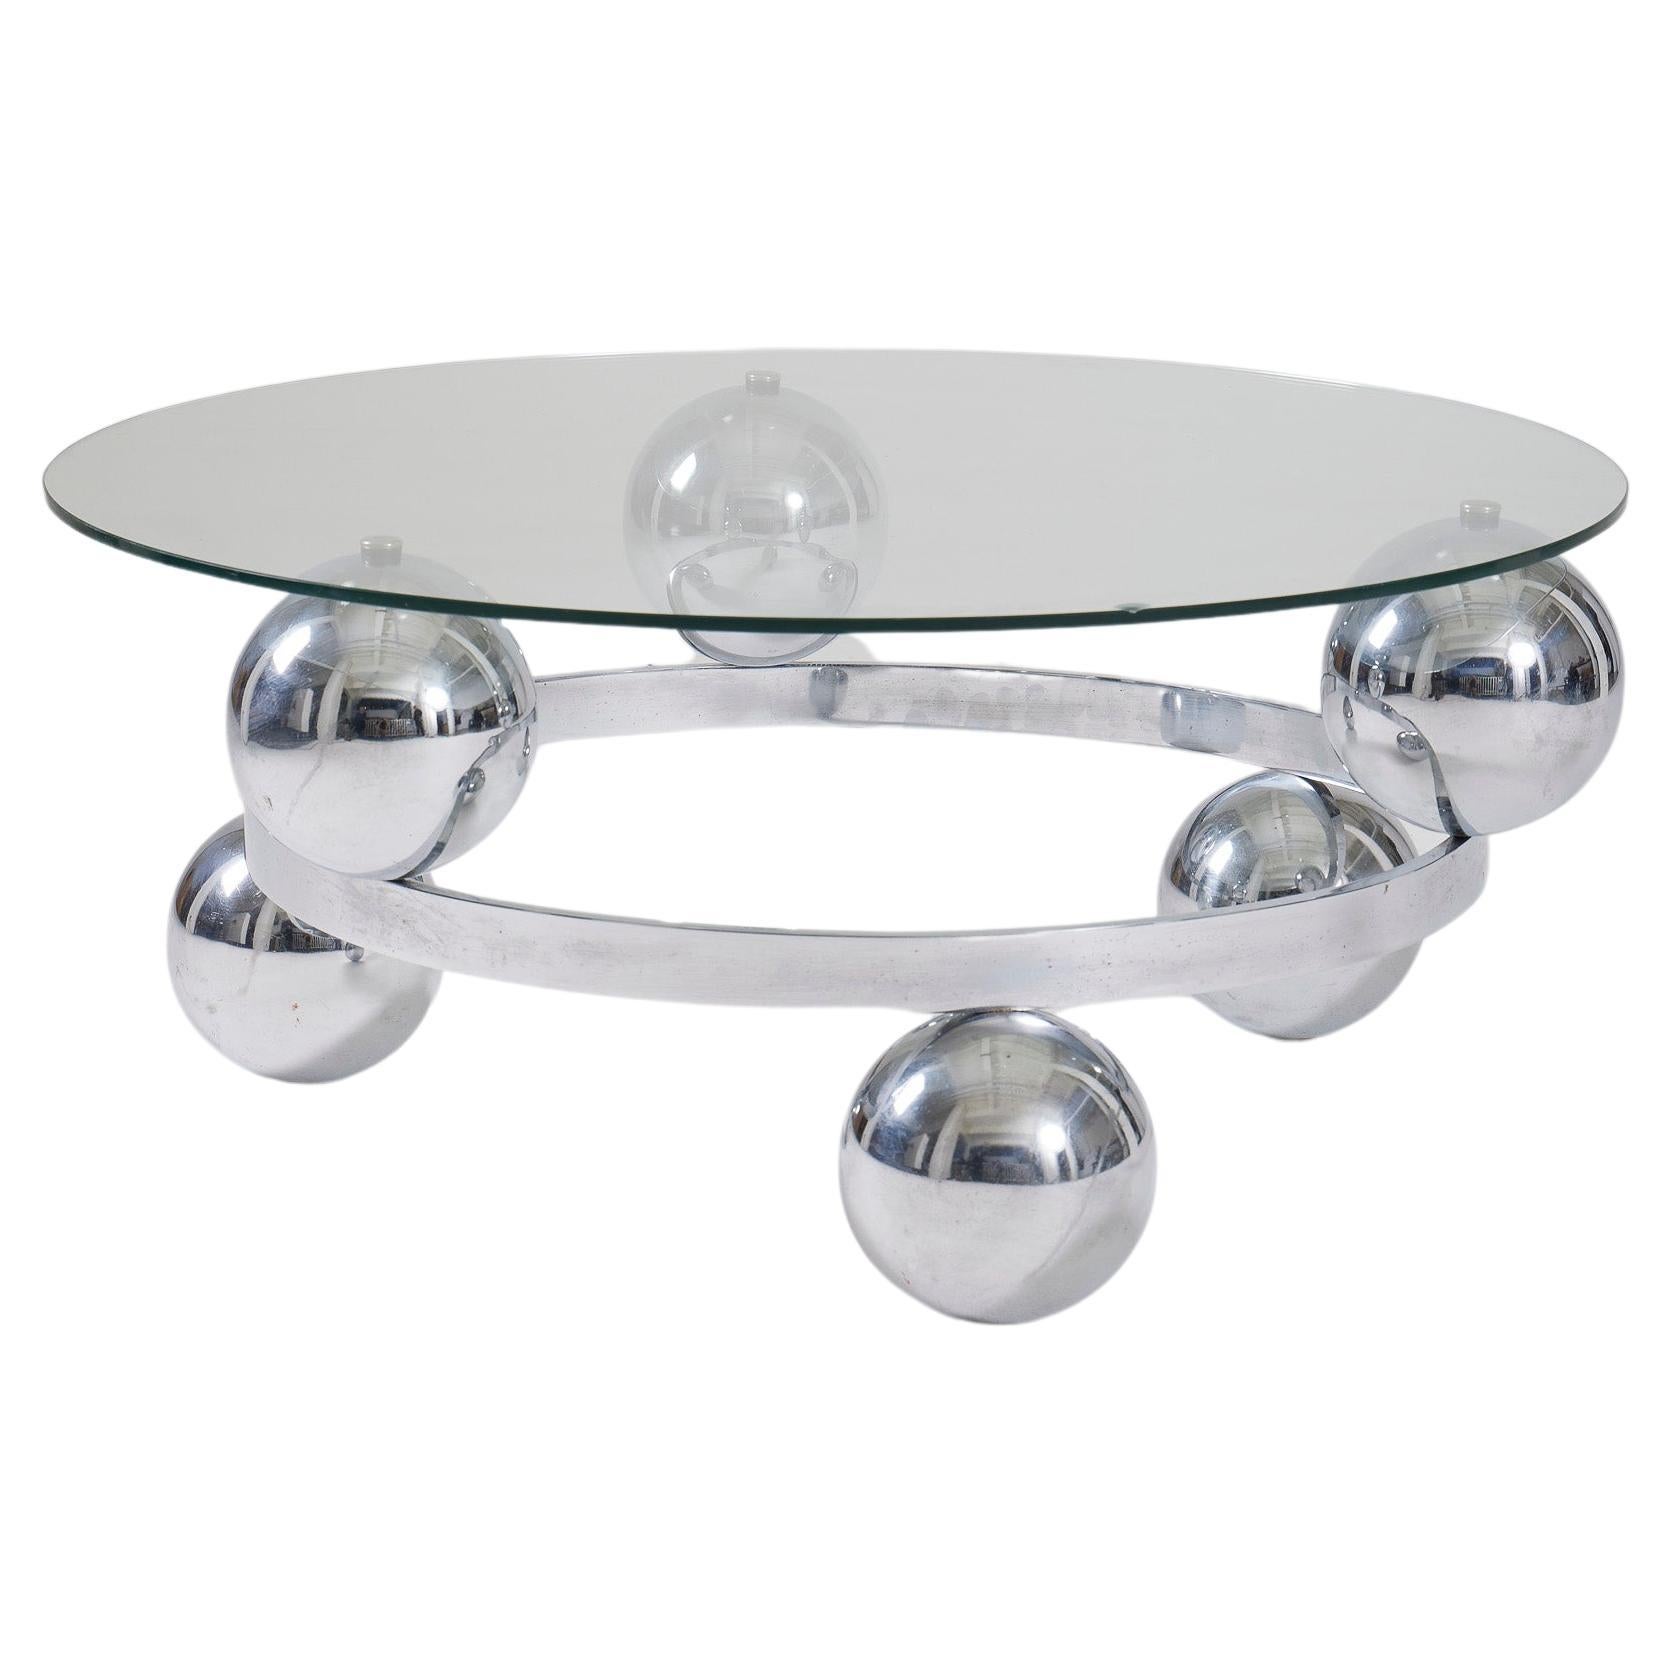 Space Age glass coffee table